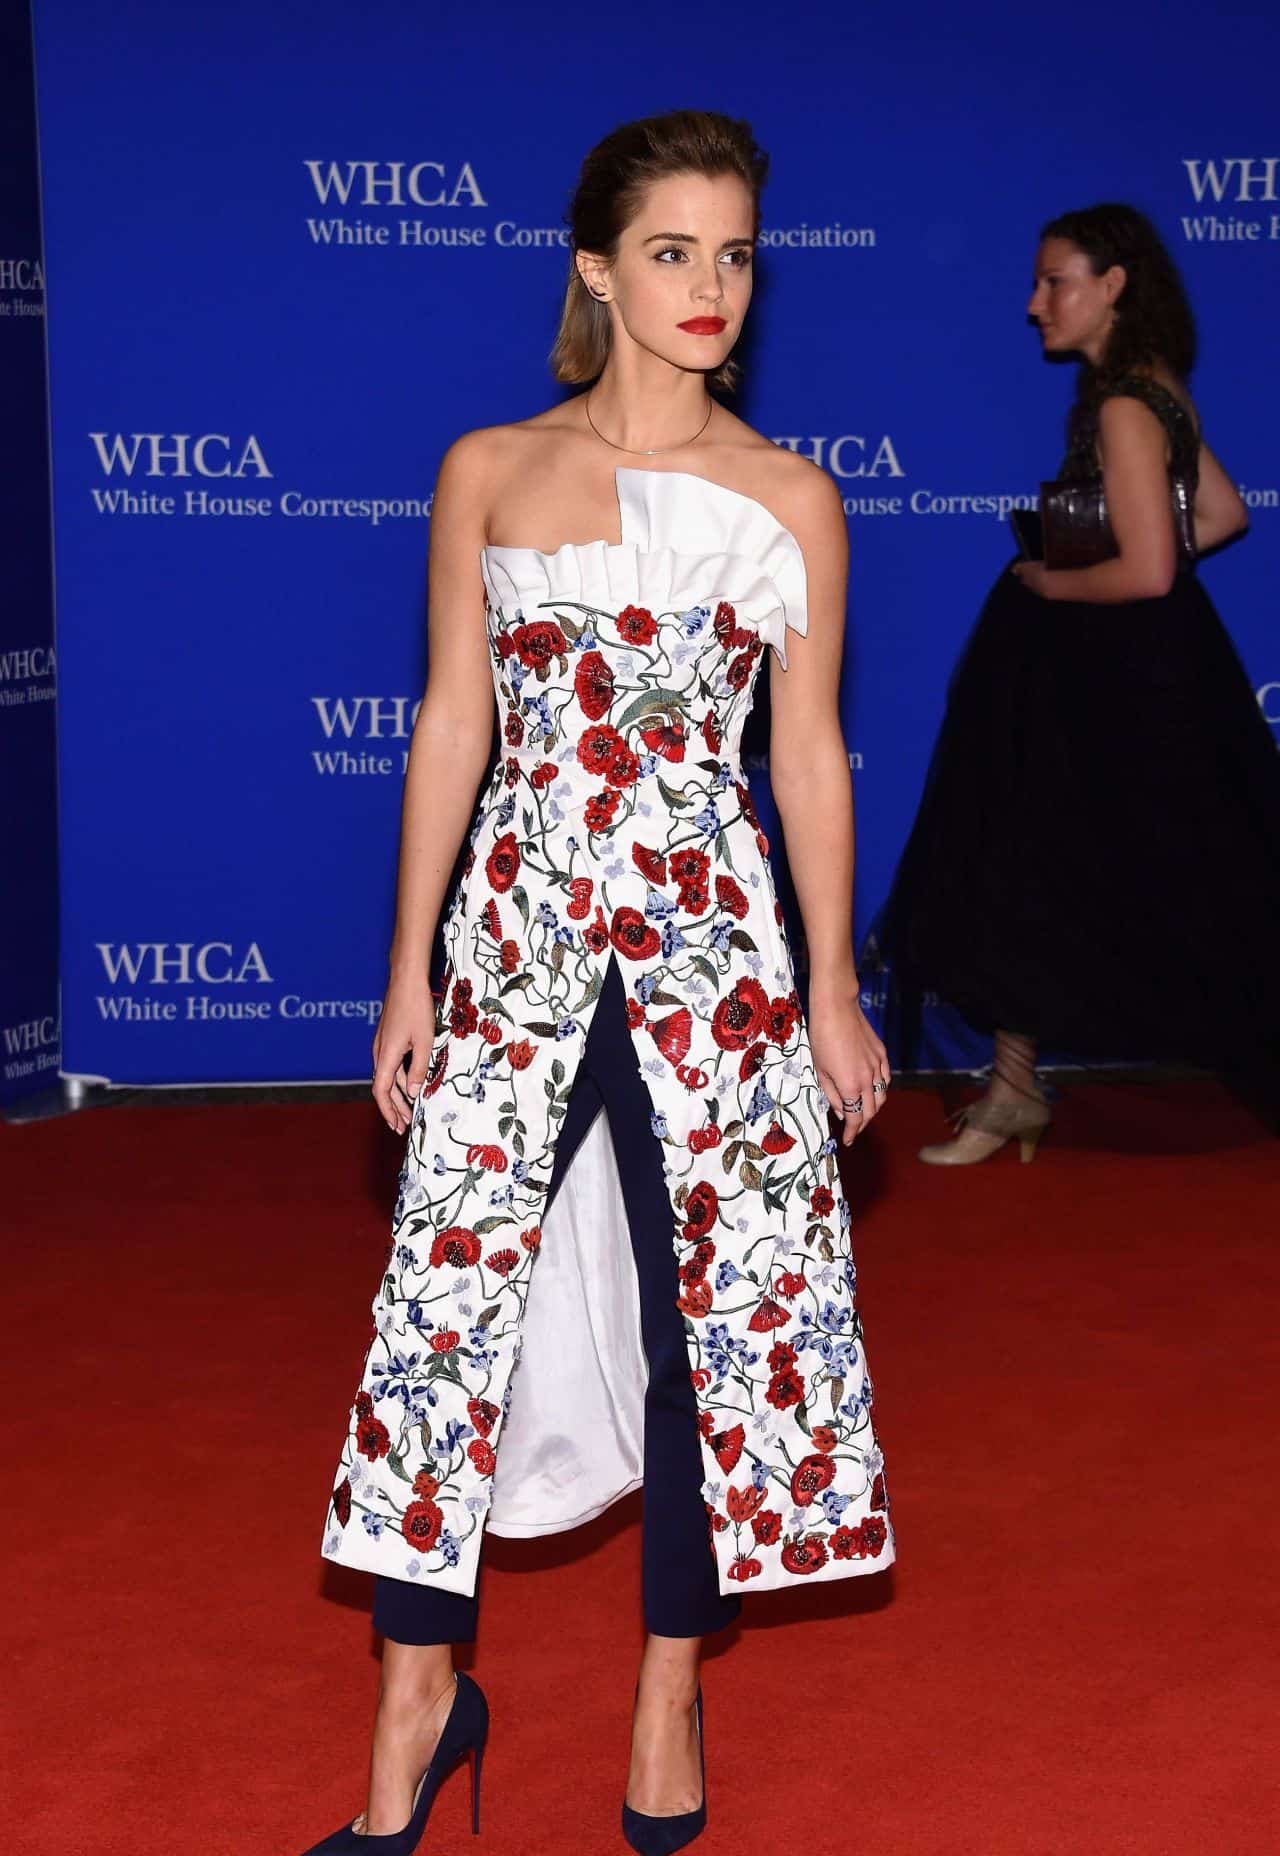 Emma Watson Took a Style Risk with a Strapless Dress and Pants at White House Correspondents' Association.